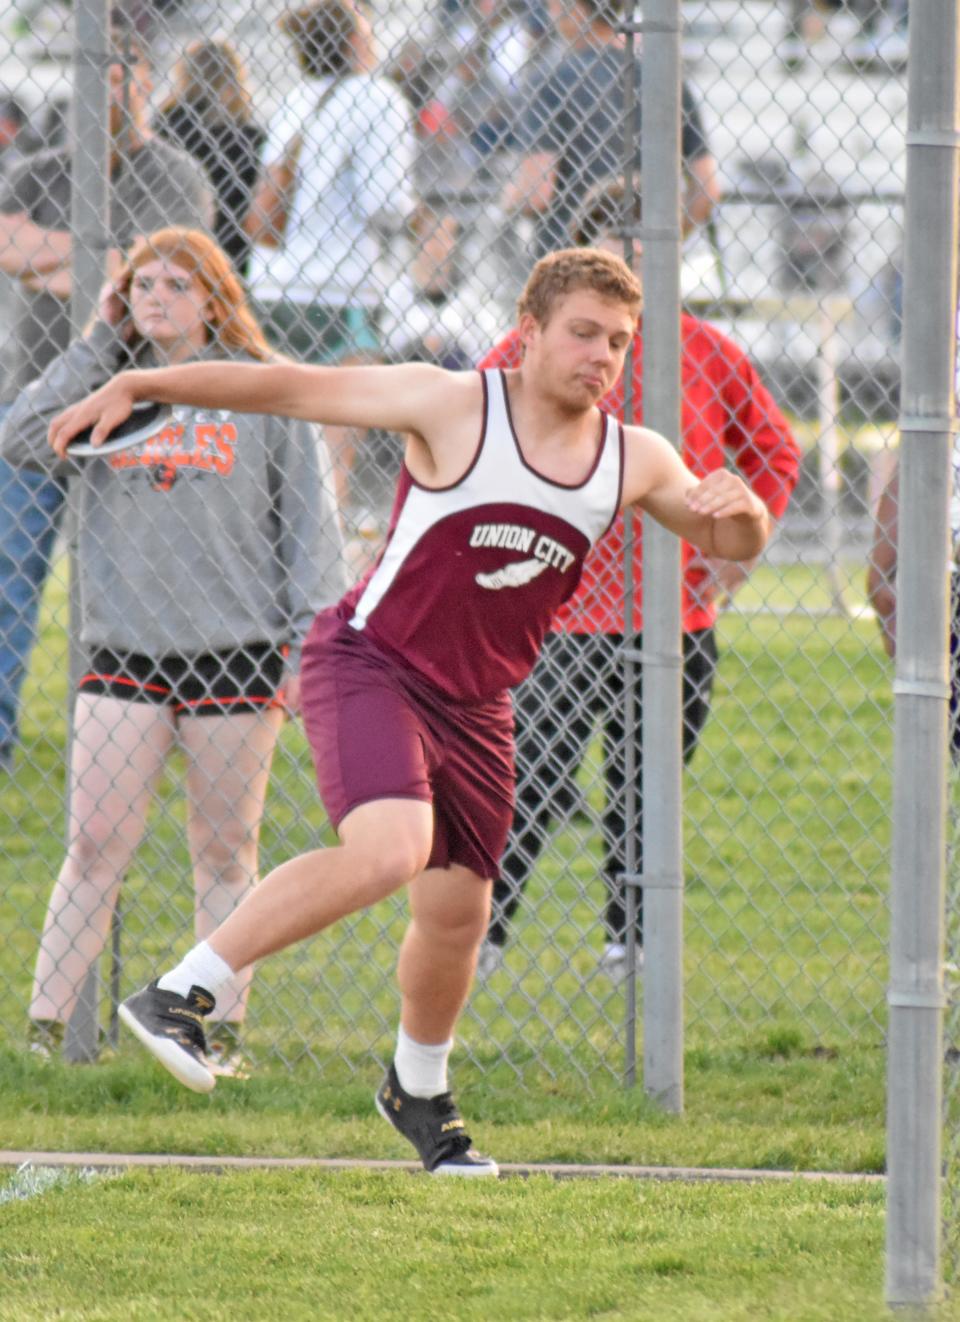 Union City senior Logan Cole swept the throwing events at Friday's John Greene Track Invitational held in Mendon